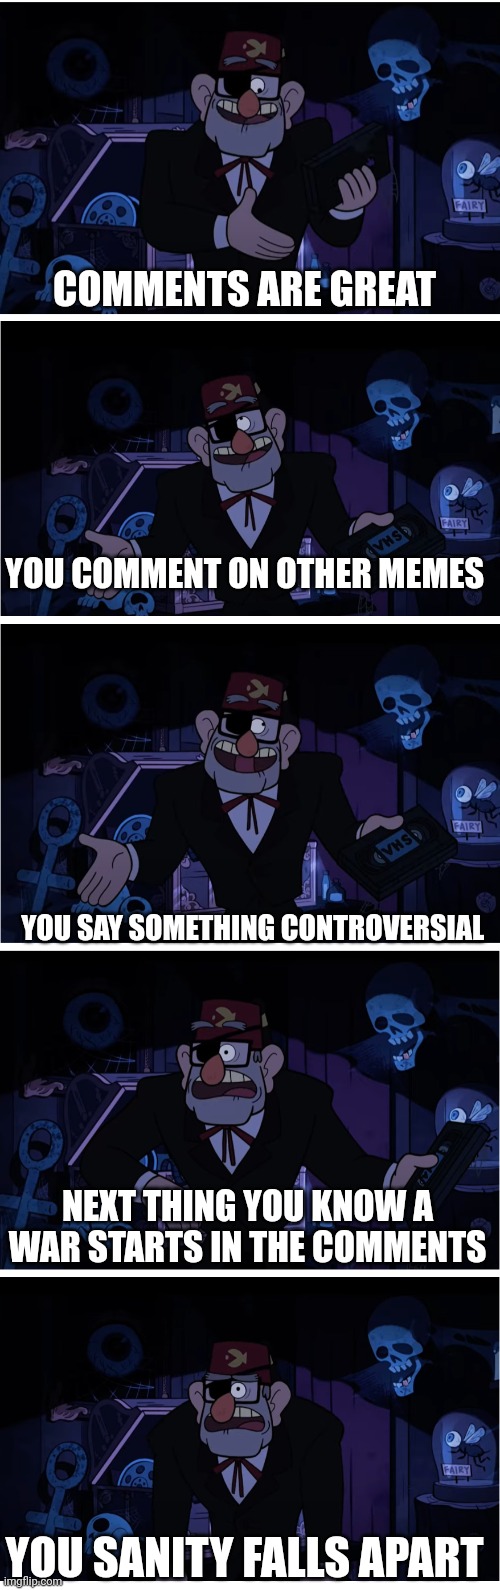 Comments are the best frfr | COMMENTS ARE GREAT; YOU COMMENT ON OTHER MEMES; YOU SAY SOMETHING CONTROVERSIAL; NEXT THING YOU KNOW A WAR STARTS IN THE COMMENTS; YOU SANITY FALLS APART | image tagged in grunkle stan describes,comments,gravity falls | made w/ Imgflip meme maker